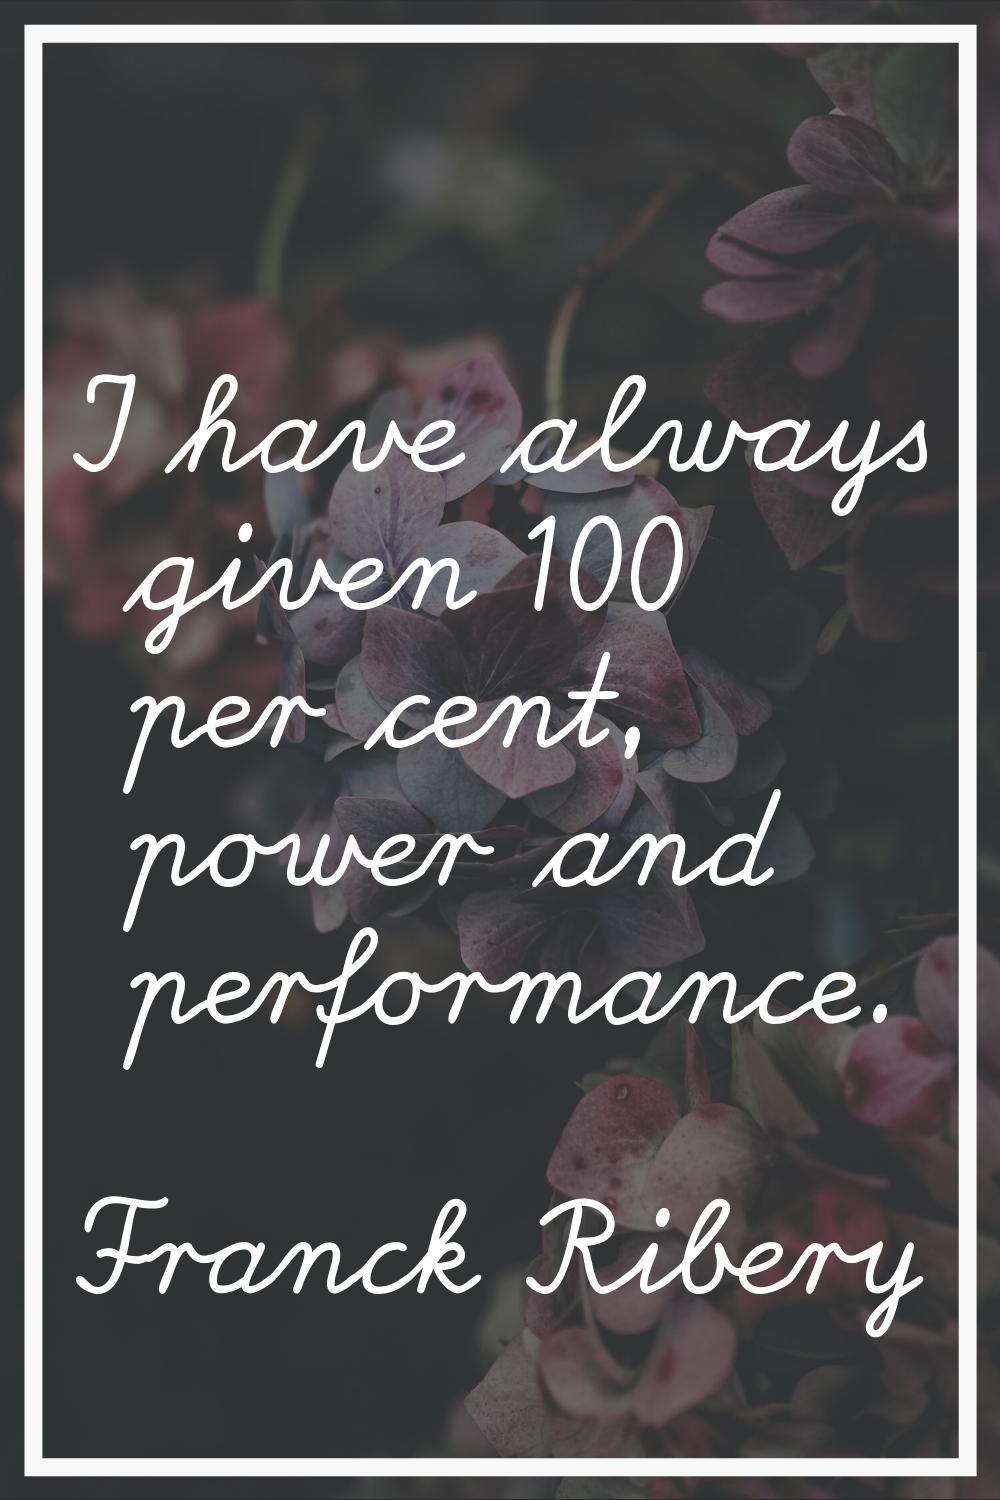 I have always given 100 per cent, power and performance.